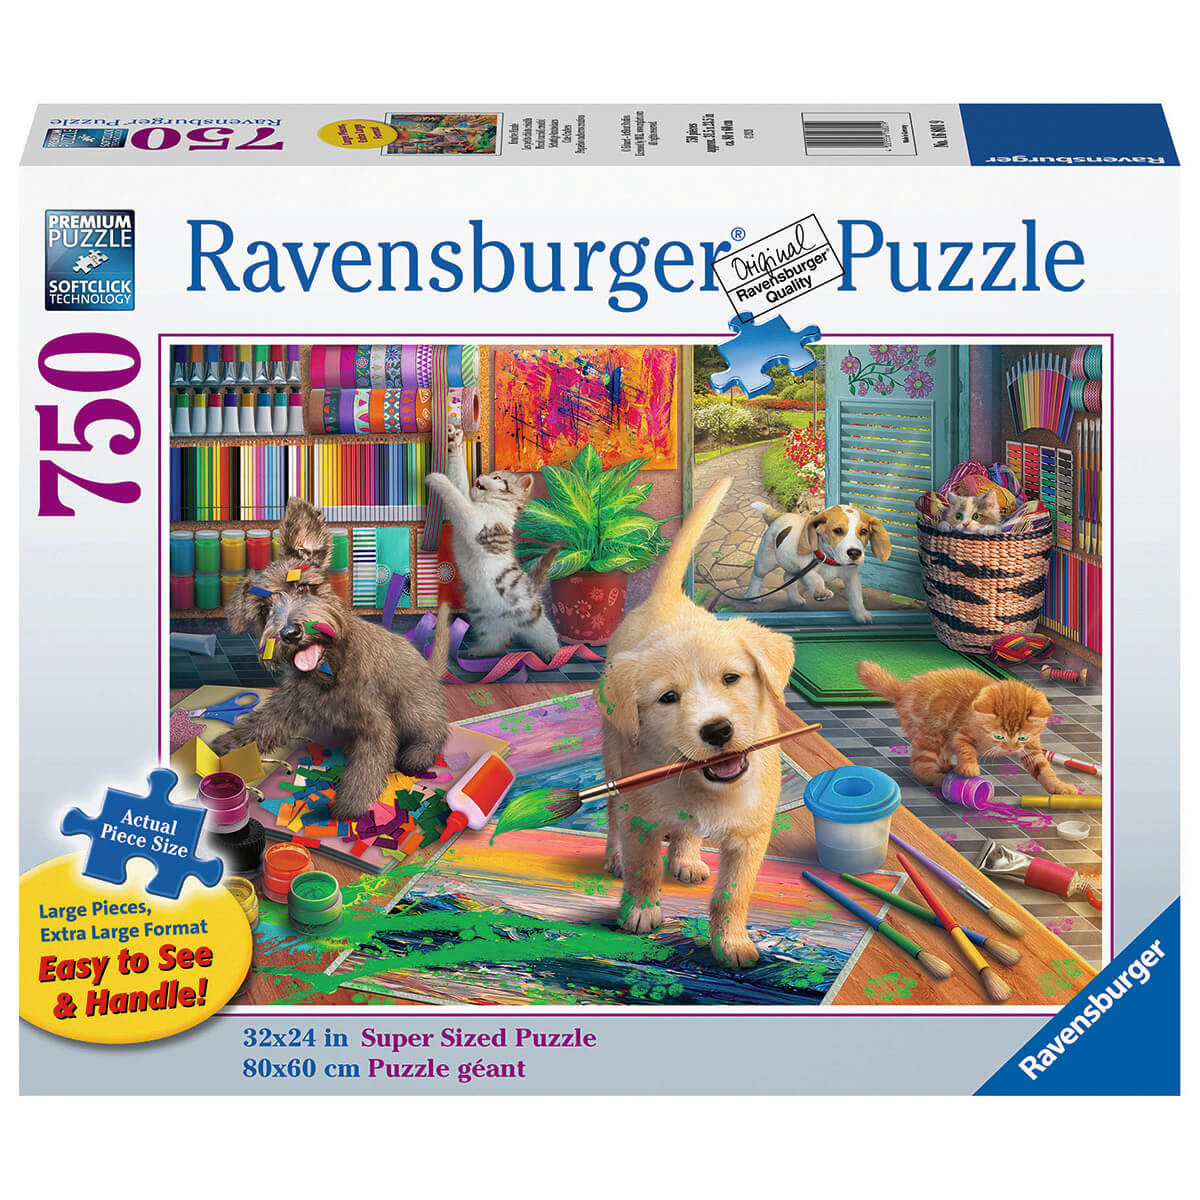 Ravensburger Cute Crafters 750 Piece Large Format  Puzzle